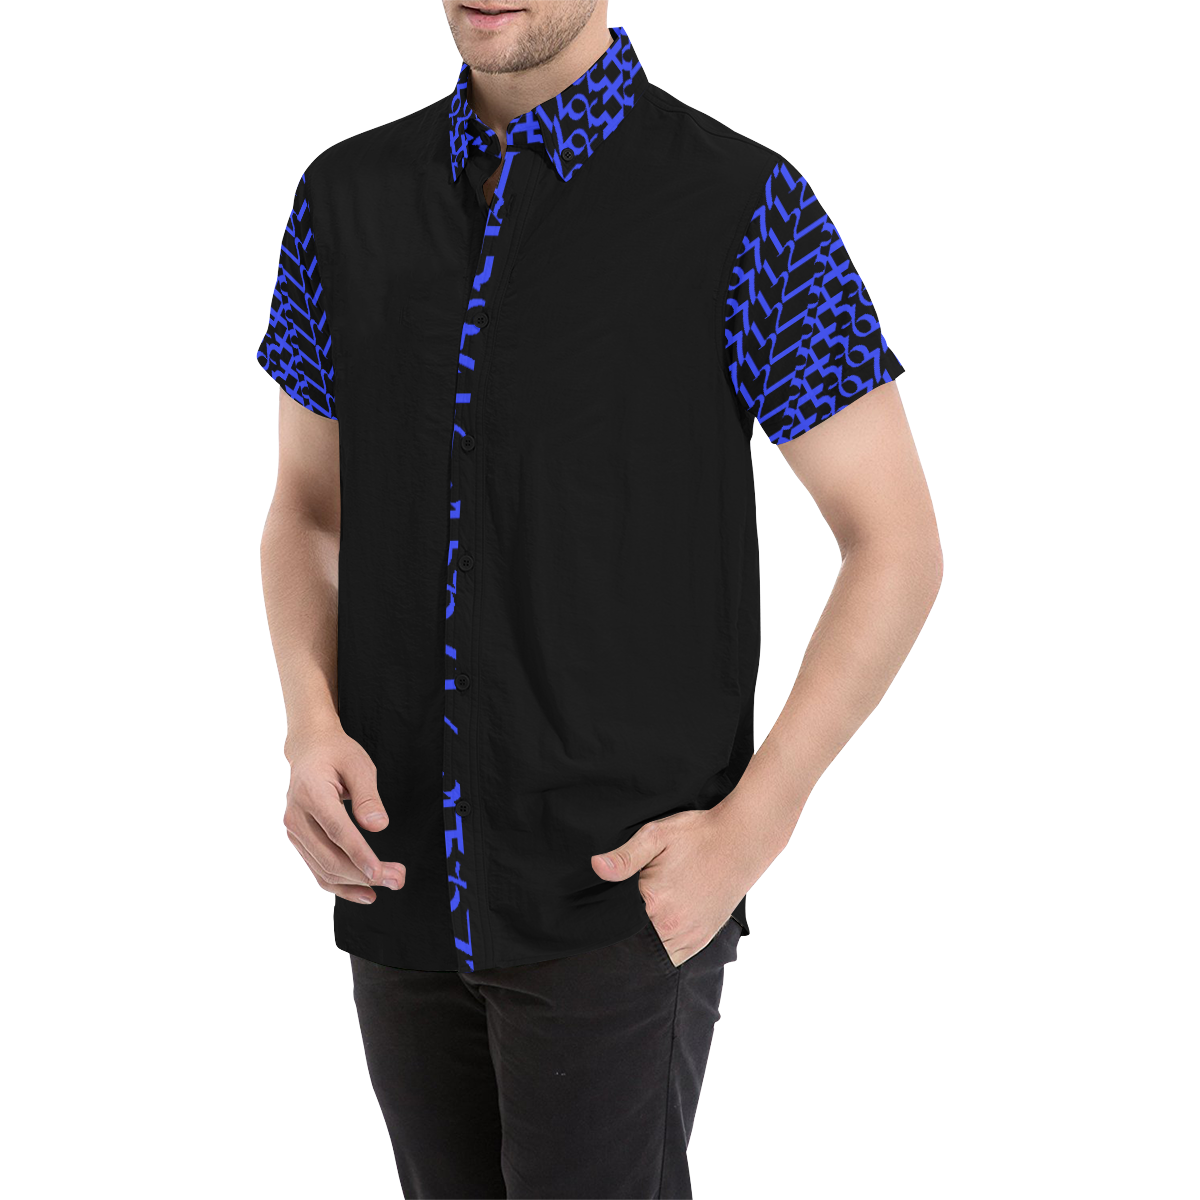 NUMBERS Collection 1234567 Black/"Reverse" Blueberry Men's All Over Print Short Sleeve Shirt (Model T53)